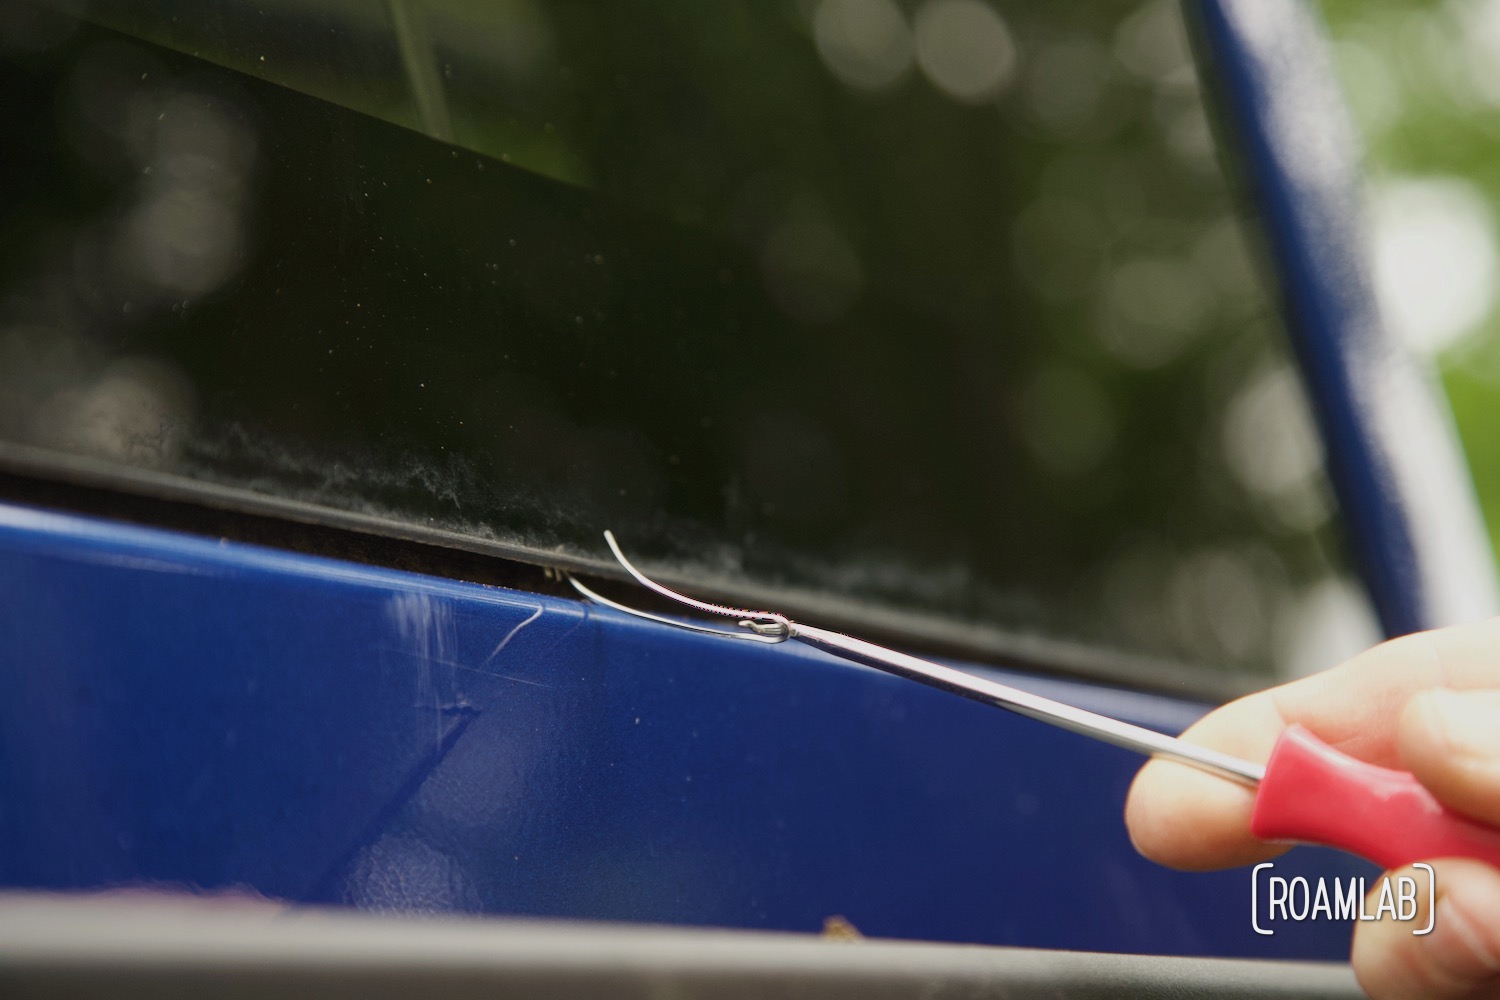 Hand pulling a hook and cutting wire through a gap between the black windshield glass and blue metal frame.